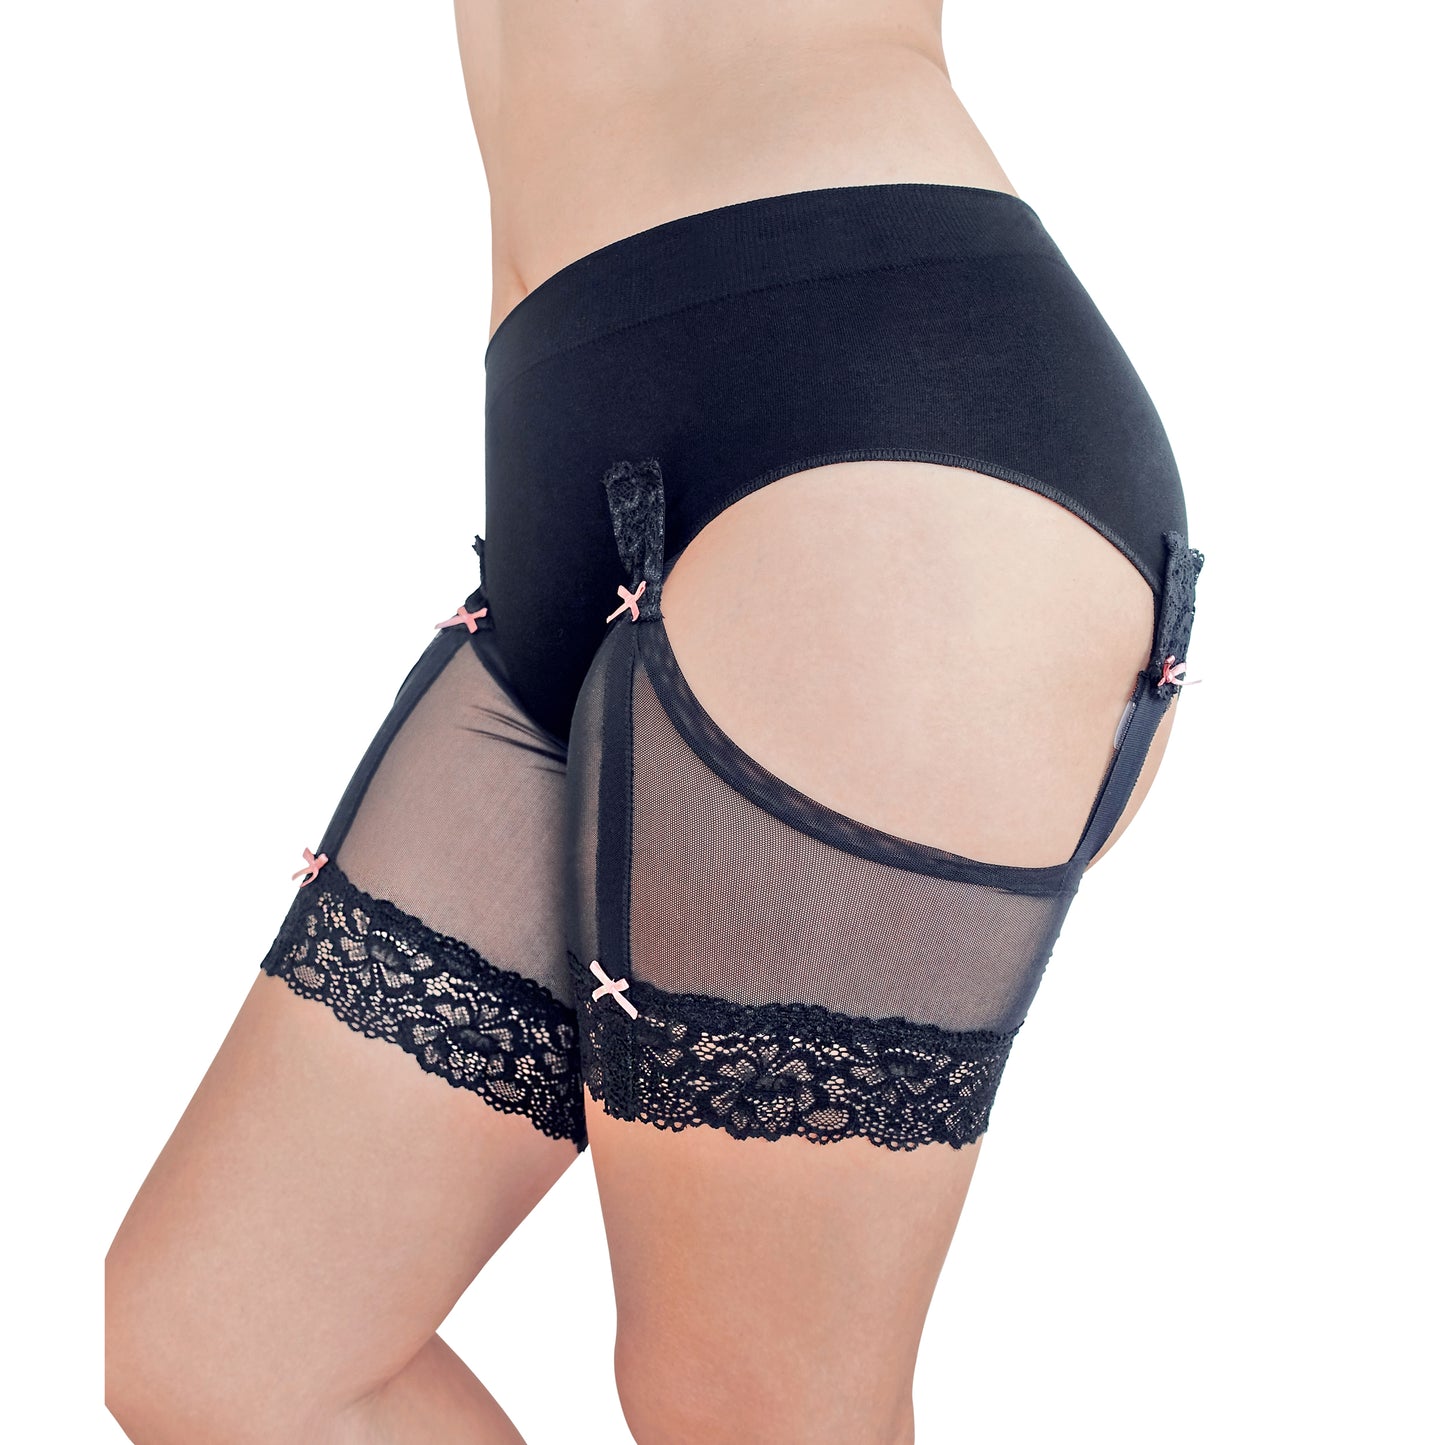 ANTI CHAFE Clip-On Thigh Bands - BLACK w.PINK BOWS